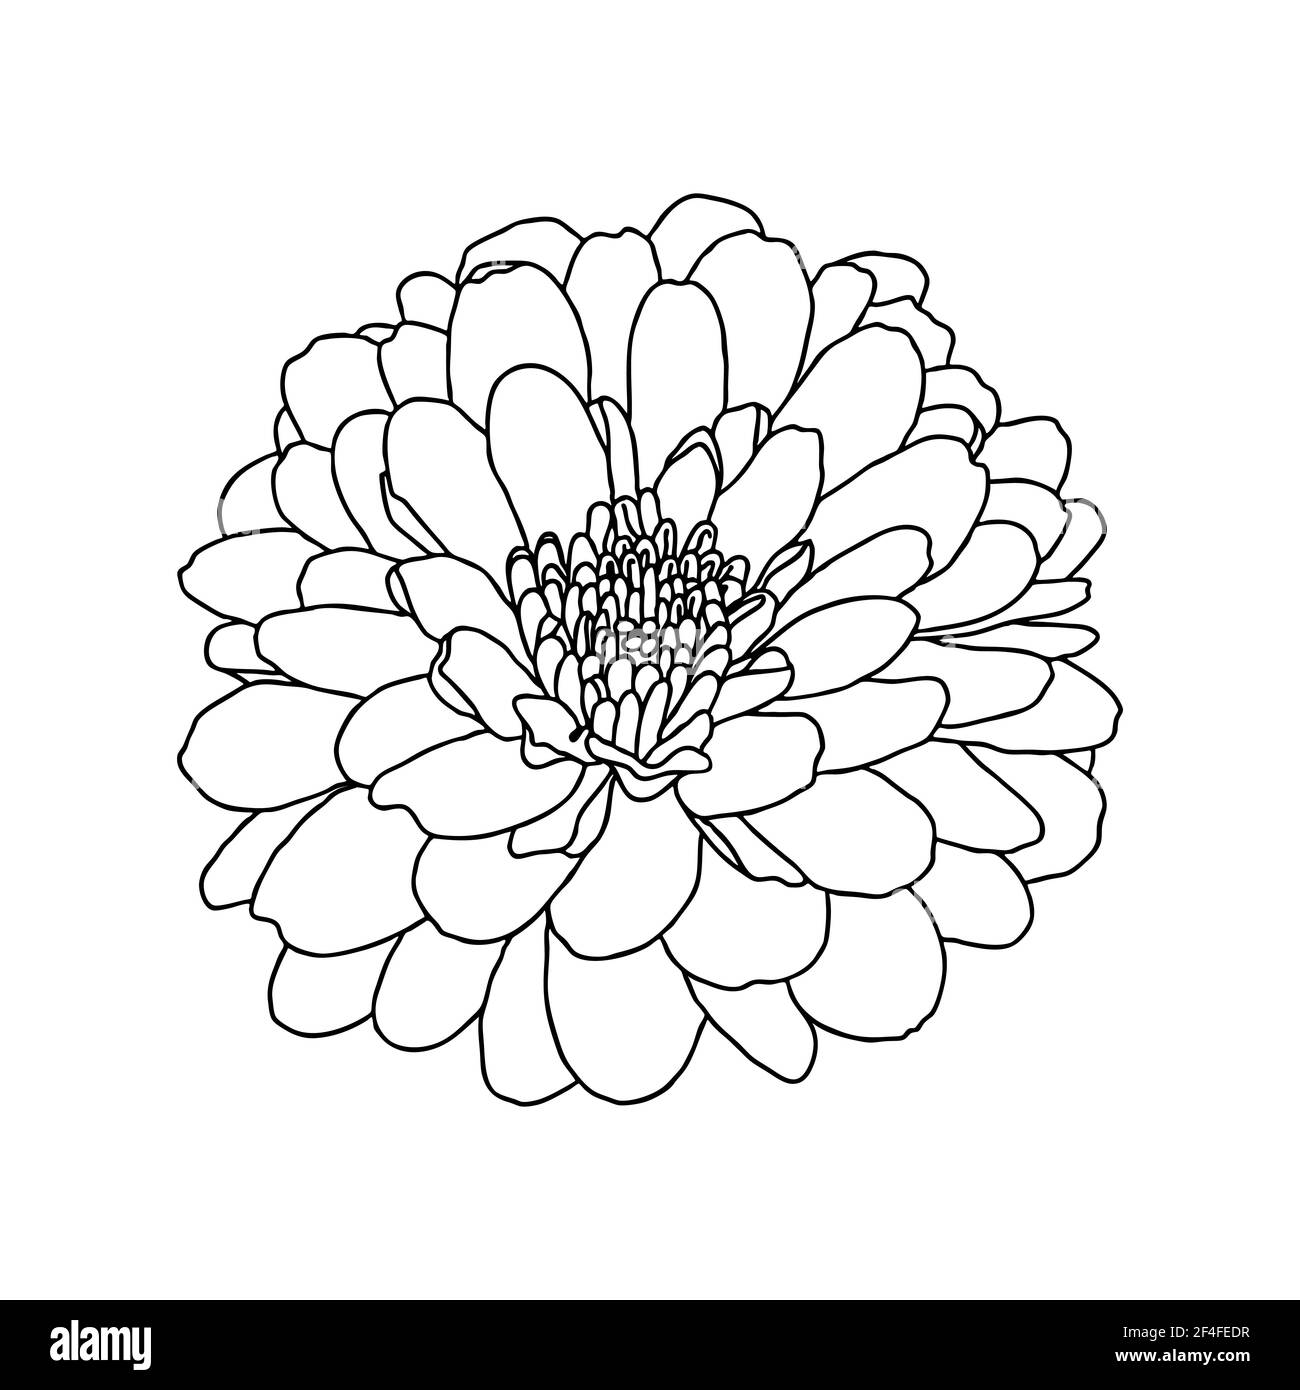 Line drawing of chrysanthemum flower on white background. Hand drawn ...